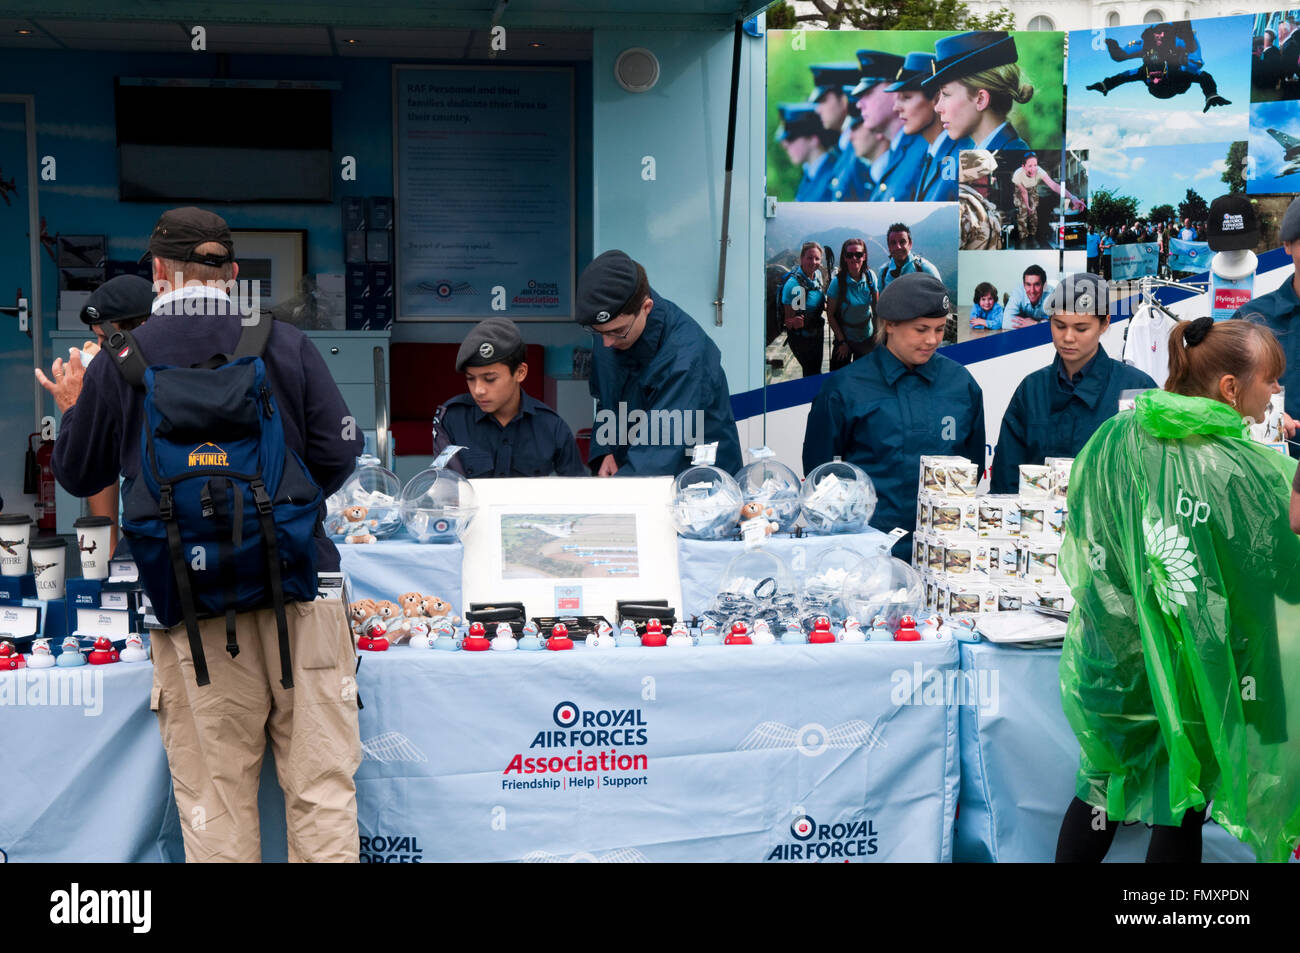 Aria cadetti manning un Royal Air Forces Association stand a Eastbourne Air Show Foto Stock